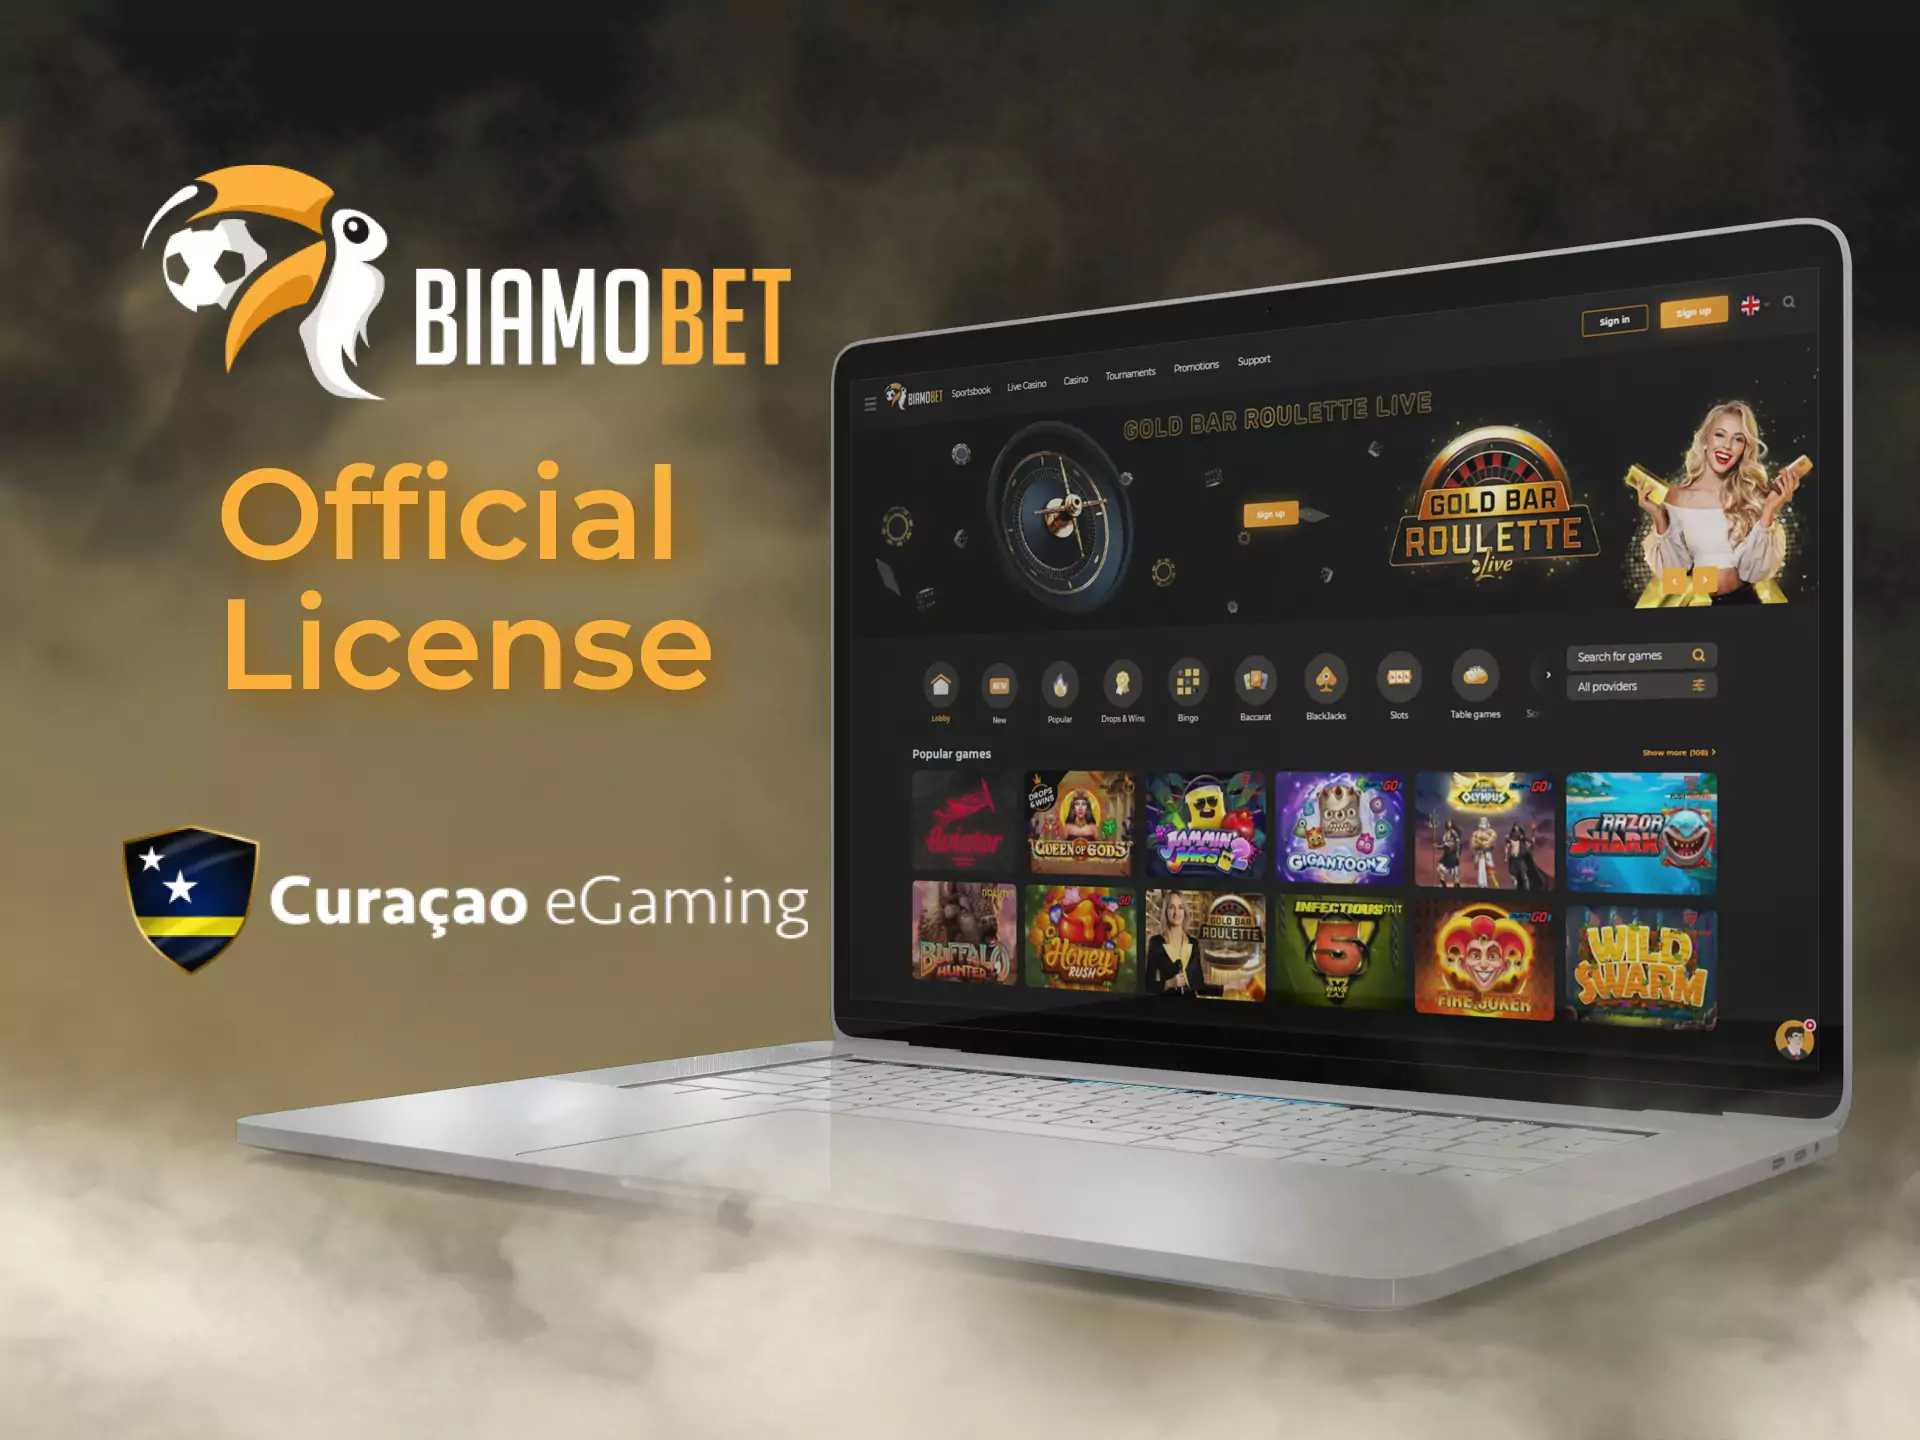 The bookmaker of Biamobet has the Curacao license and works legally.